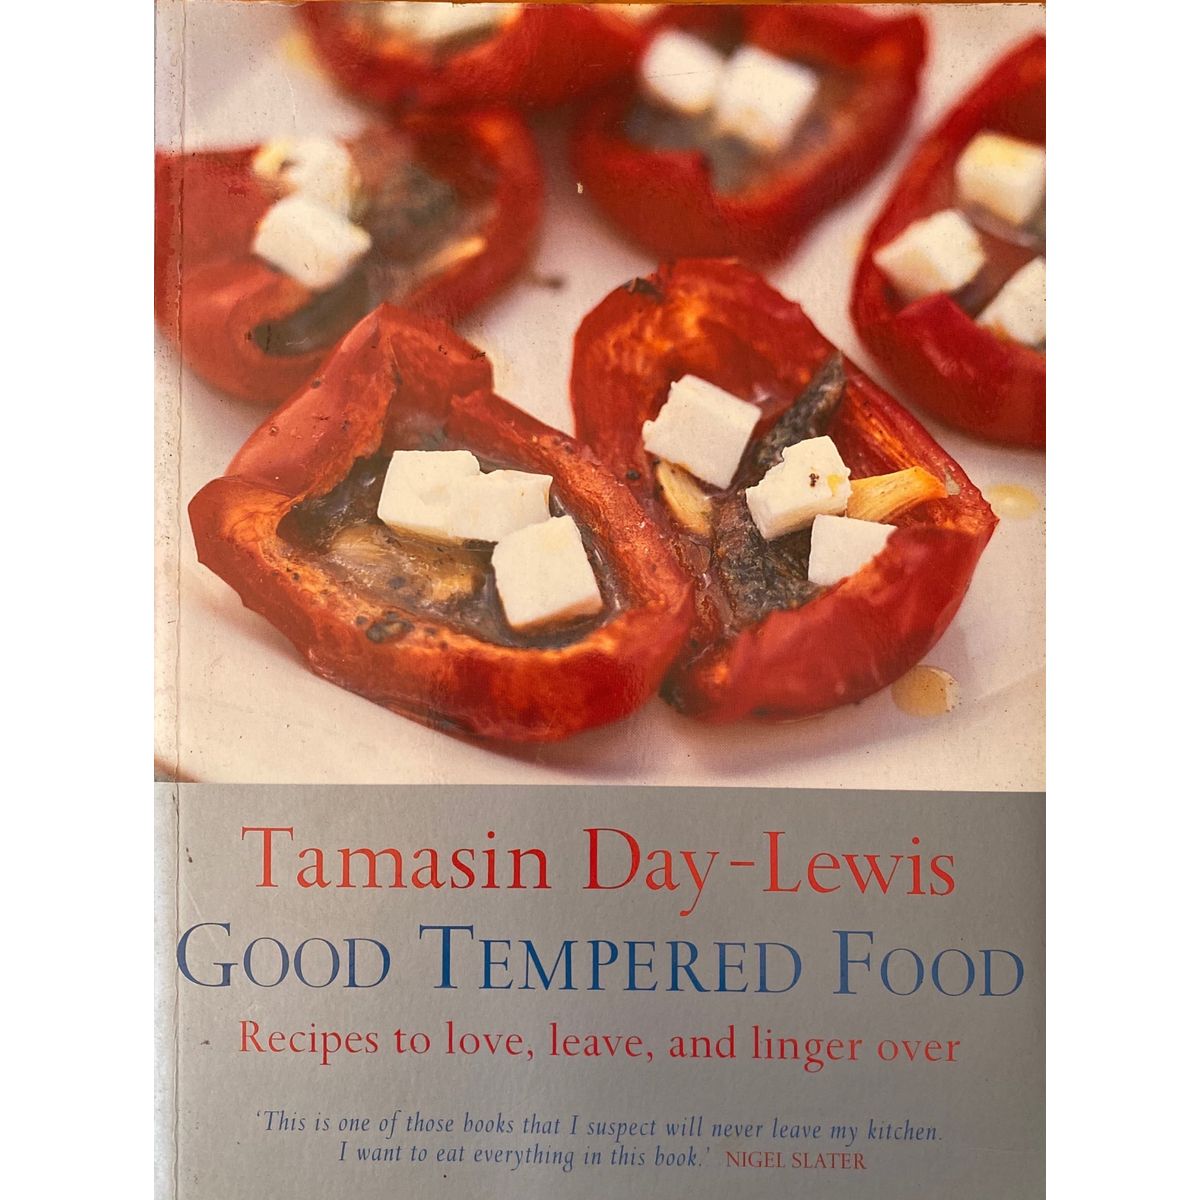 ISBN: 9781841882284 / 1841882283 - Good Tempered Food: Recipes to Love, Leave, and Linger Over by Tamasin Day-Lewis [2004]